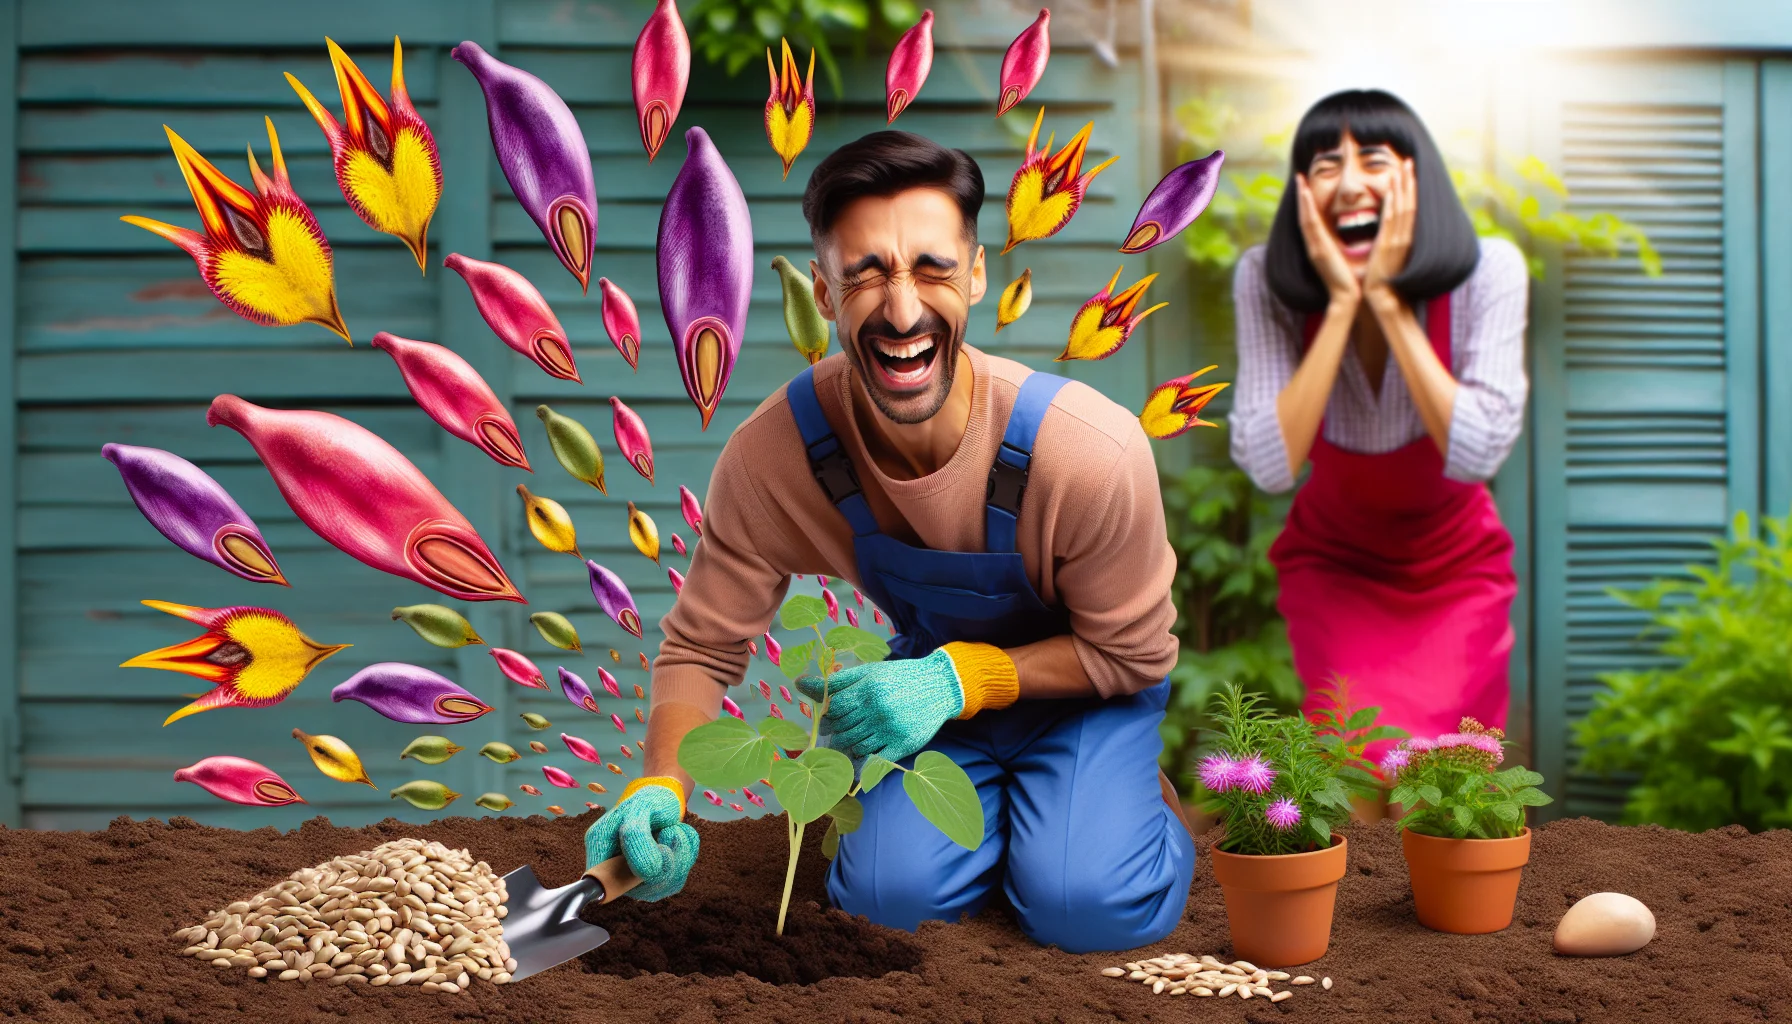 Create a comical scenario featuring a variety of vibrant swallowtail garden seeds. Picture a male South Asian gardener, chuckling heartily as he tries to plant these seeds but they keep popping out of the ground like little fireworks. Nearby, a female Caucasian gardener is completely amused, clearly seen enjoying the extraordinary gardening experience. The atmosphere is vibrant and fun-filled, enticing everyone to partake in the joys of gardening.